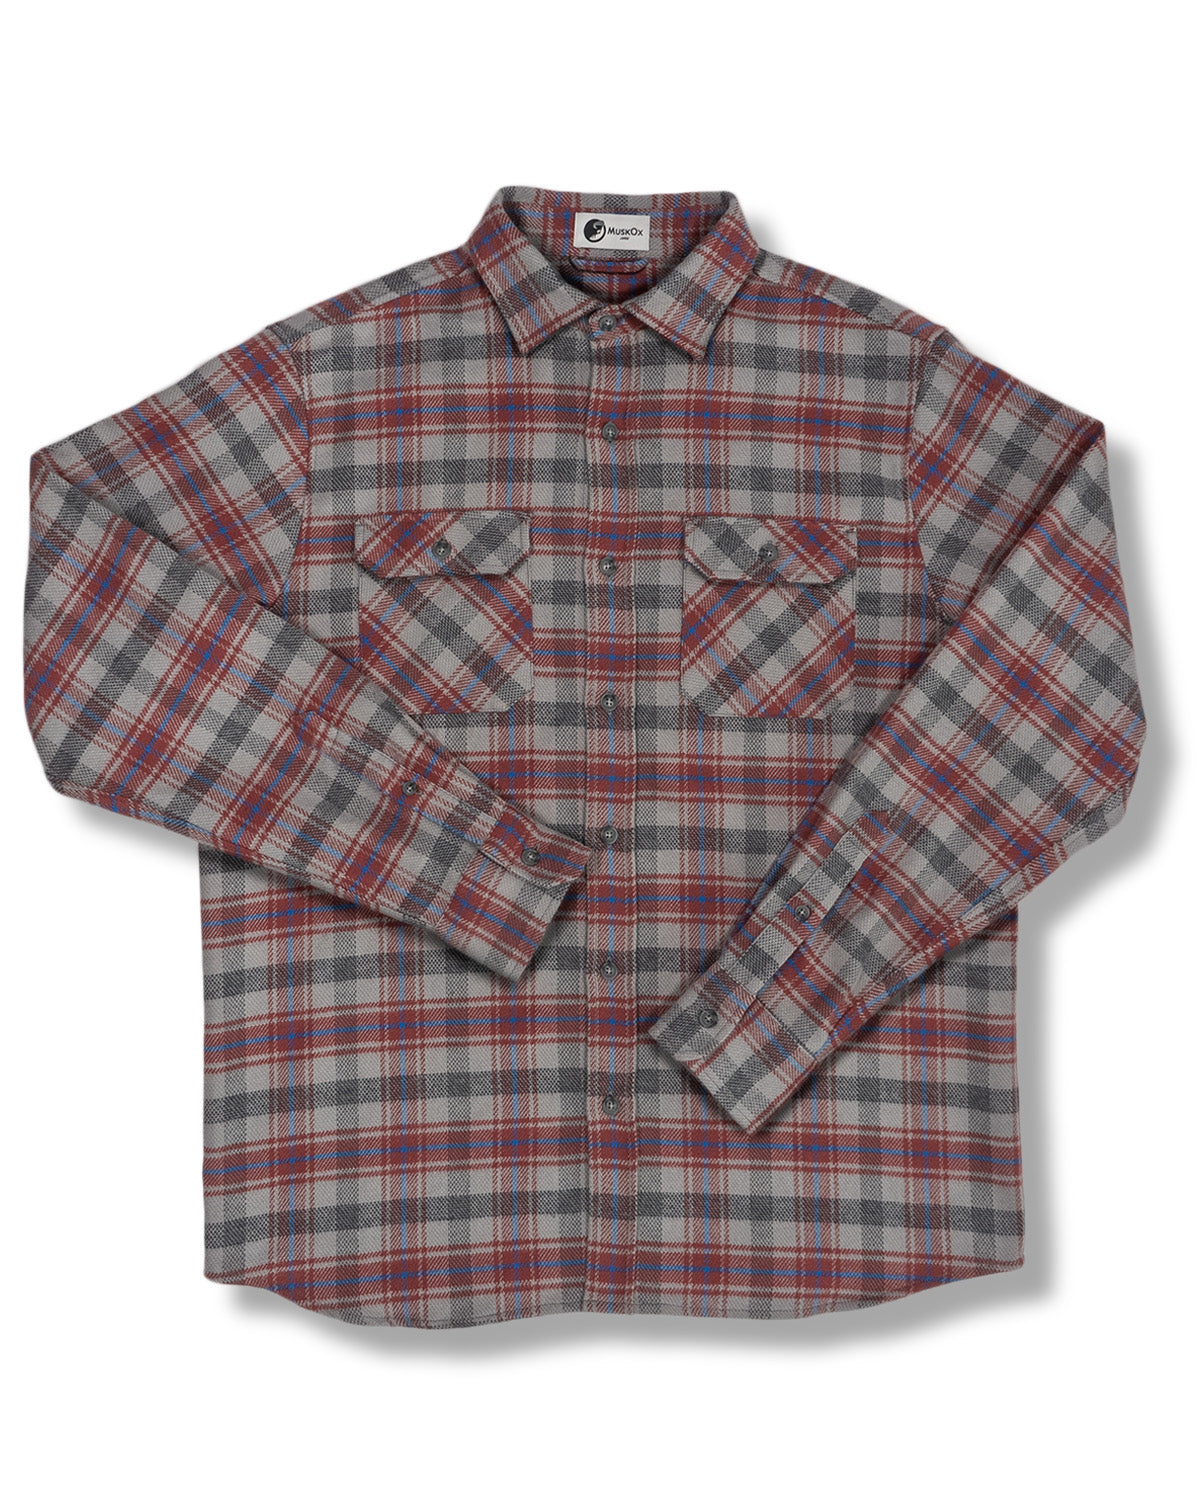 Soft Flannel Shirt for Men in 100% Cotton, Field Grand Flannel in 